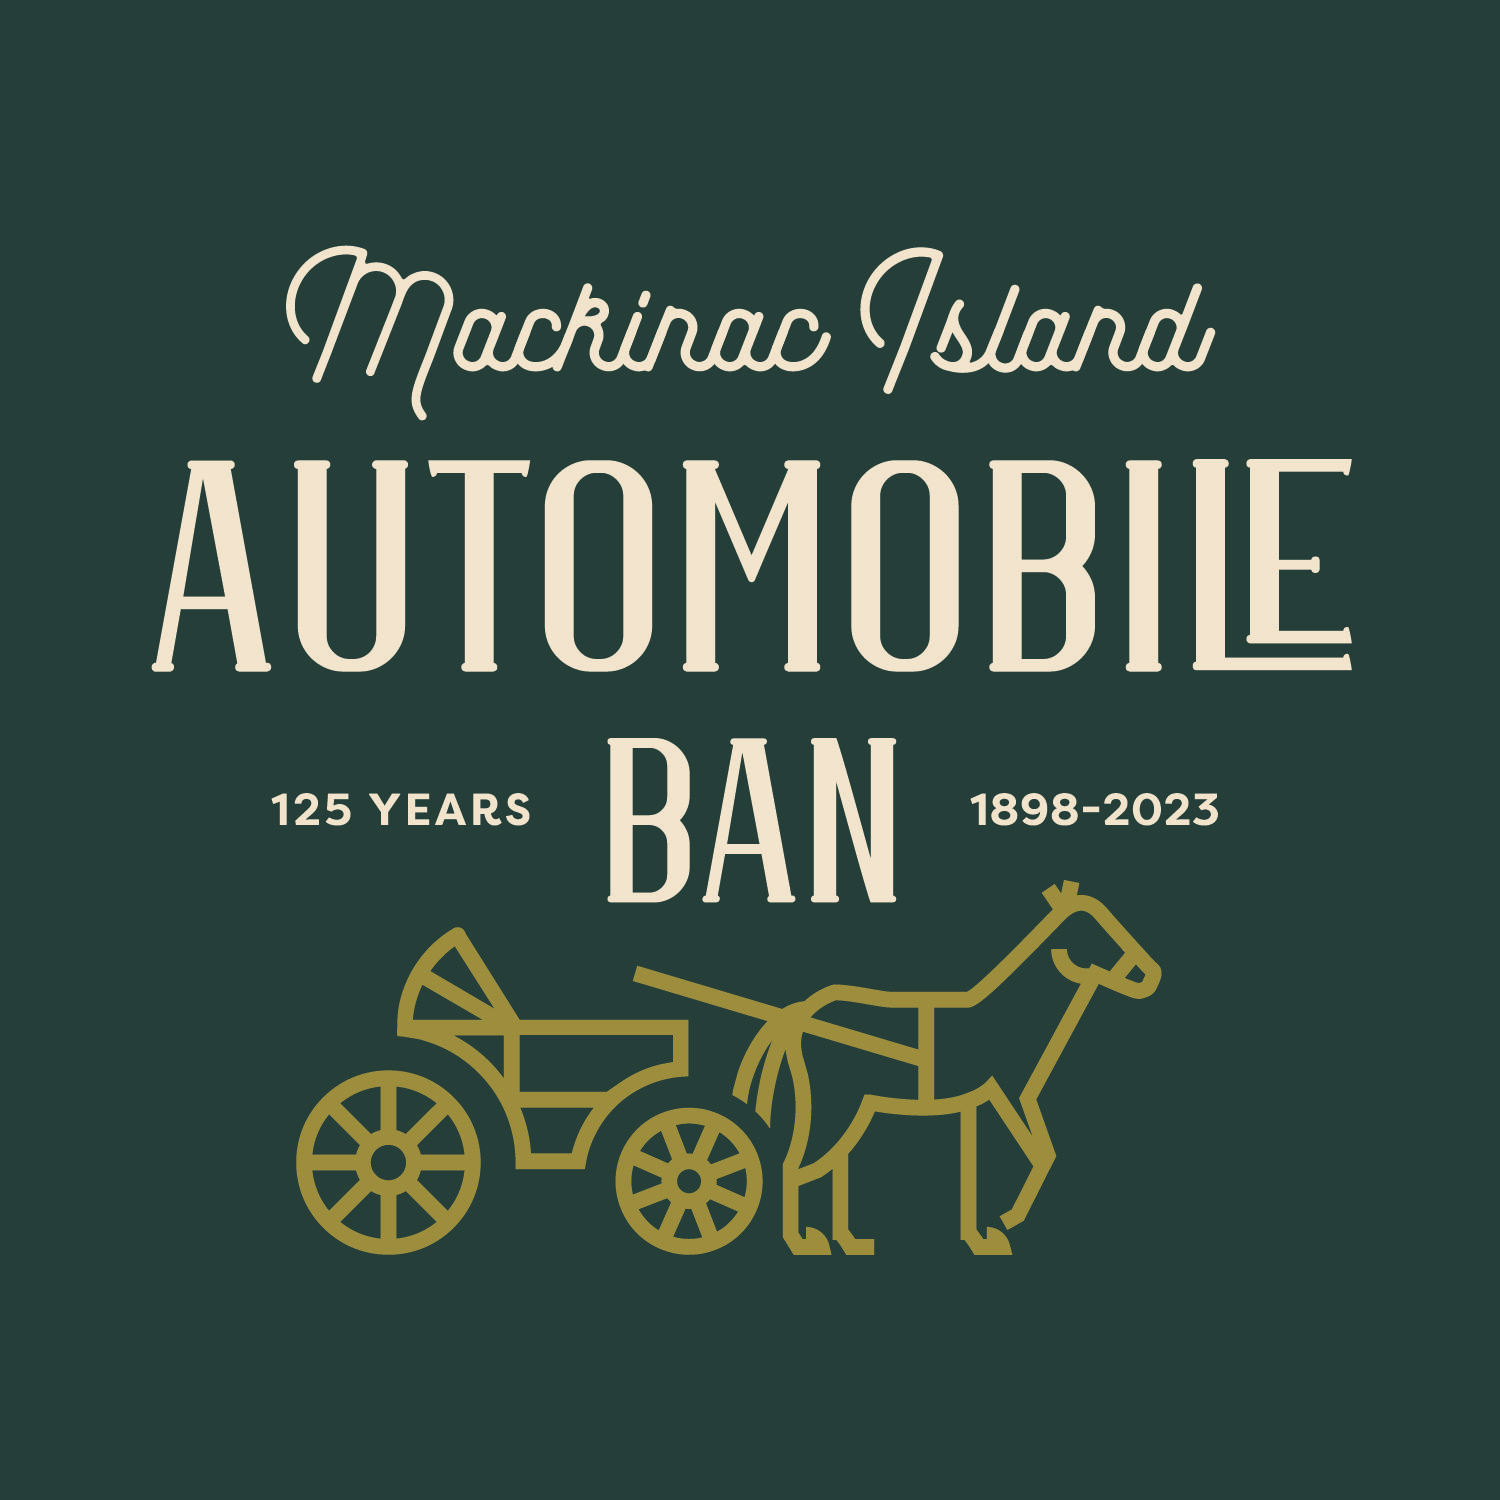 A logo for the Mackinac Island Automobile Ban in green and gold.